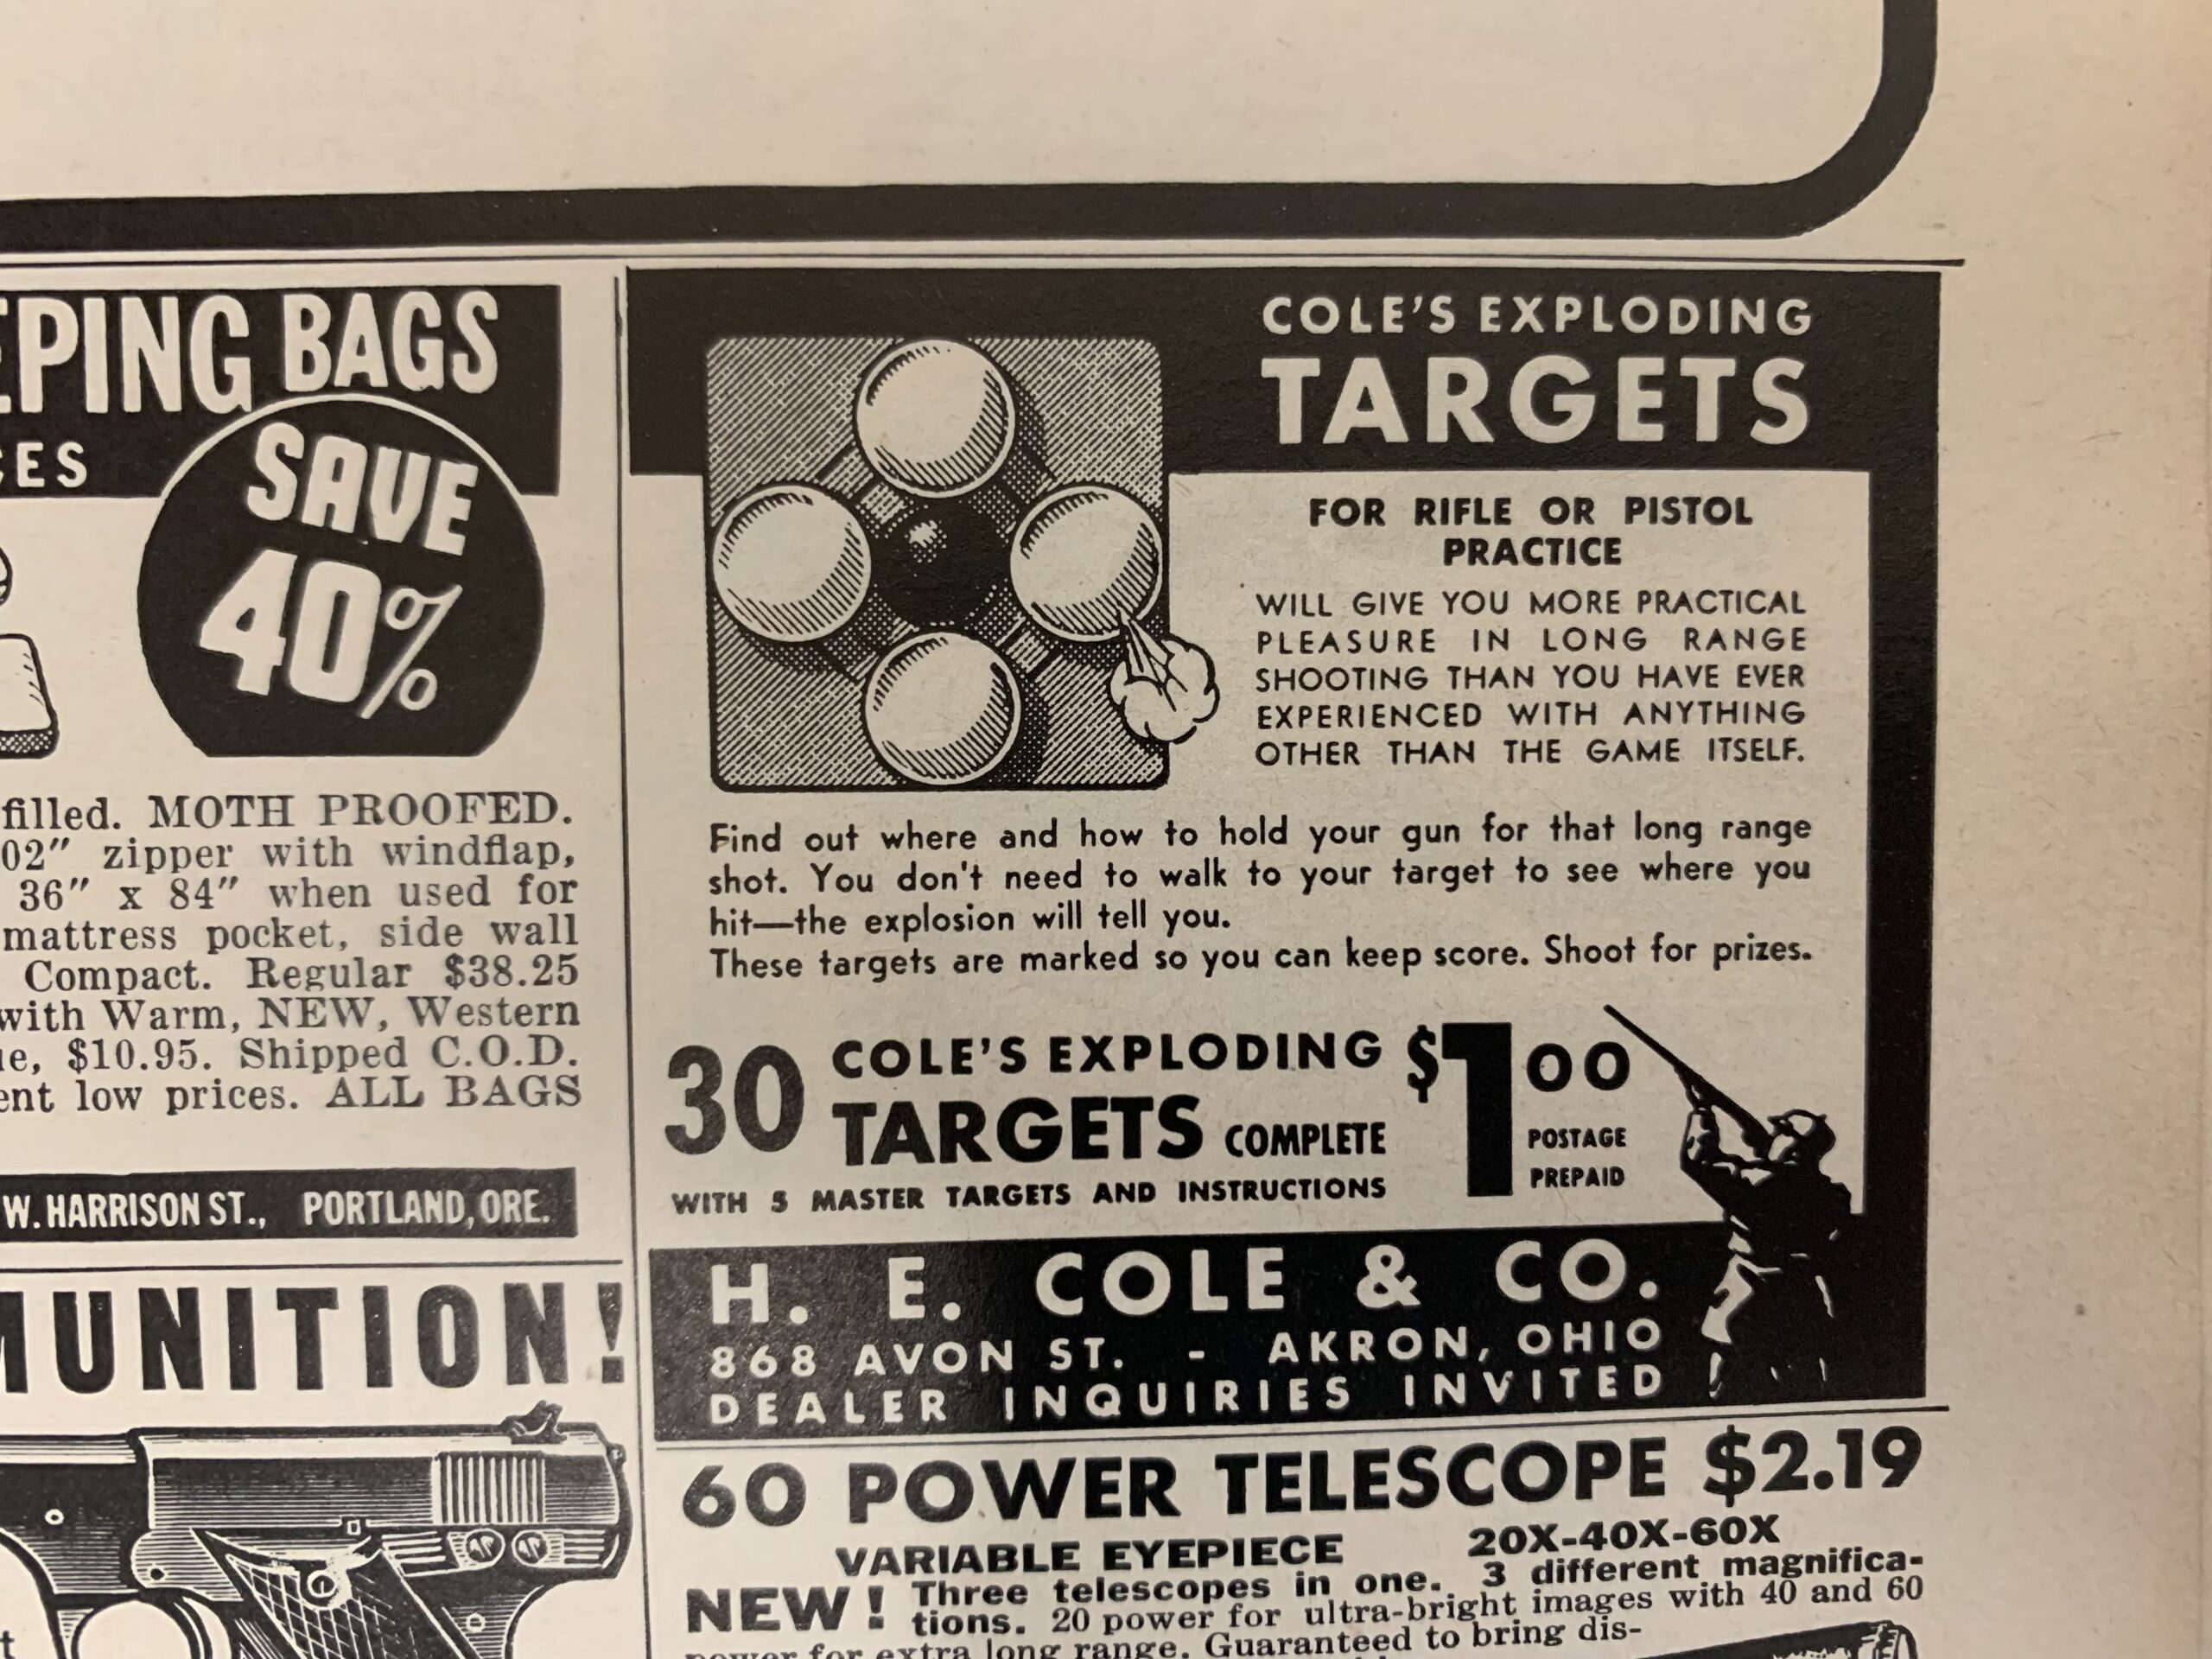 1940 ad for exploding rifle targets